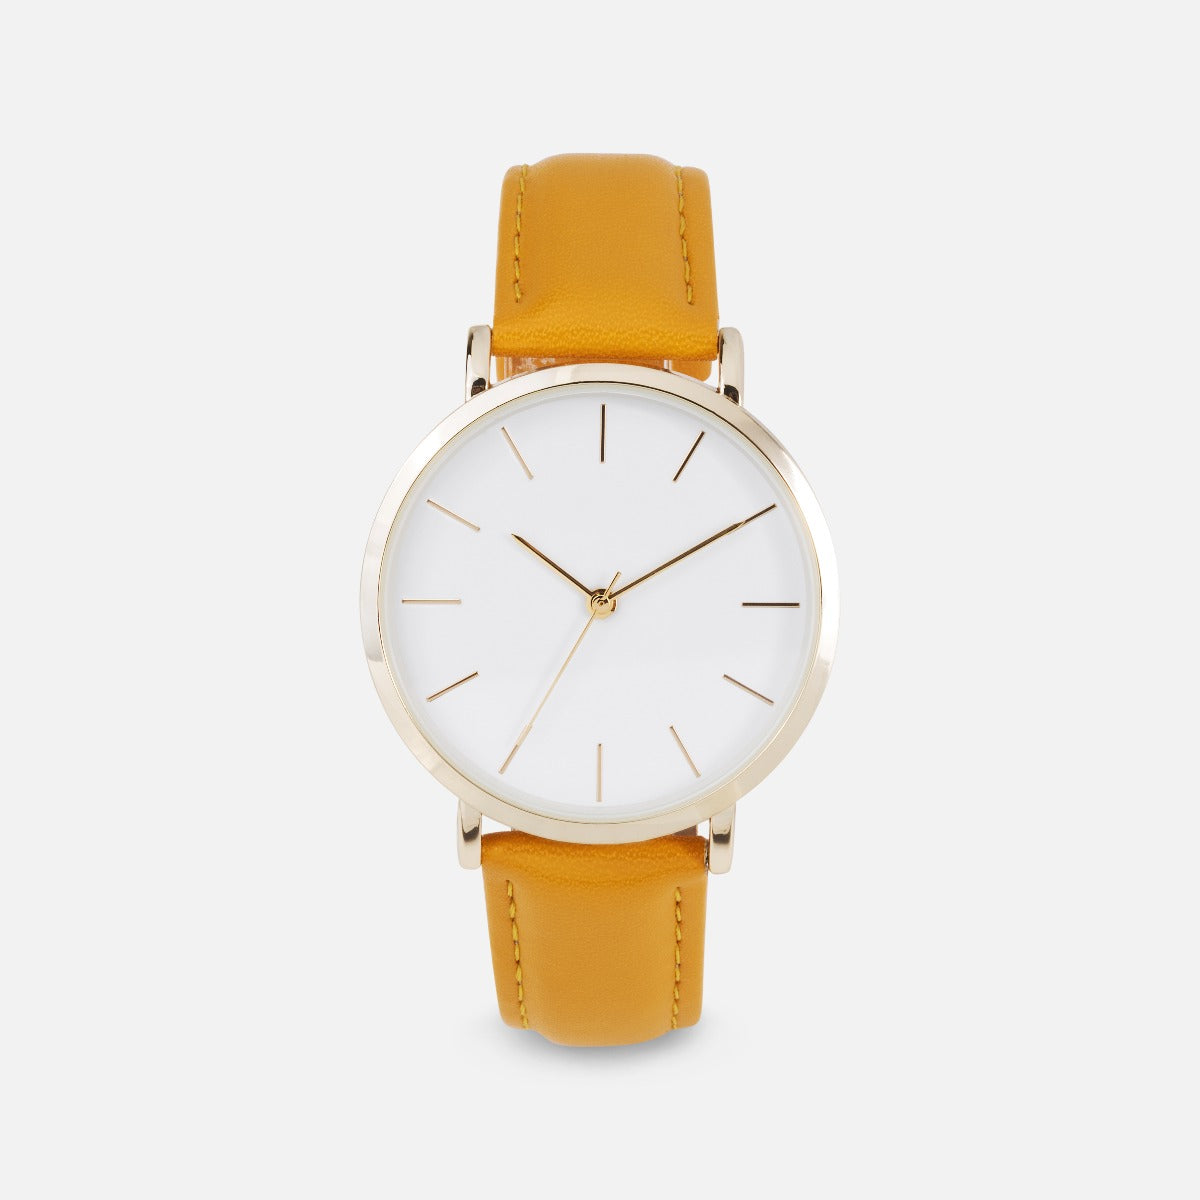 Classik collection - round dial watch with yellow bracelet